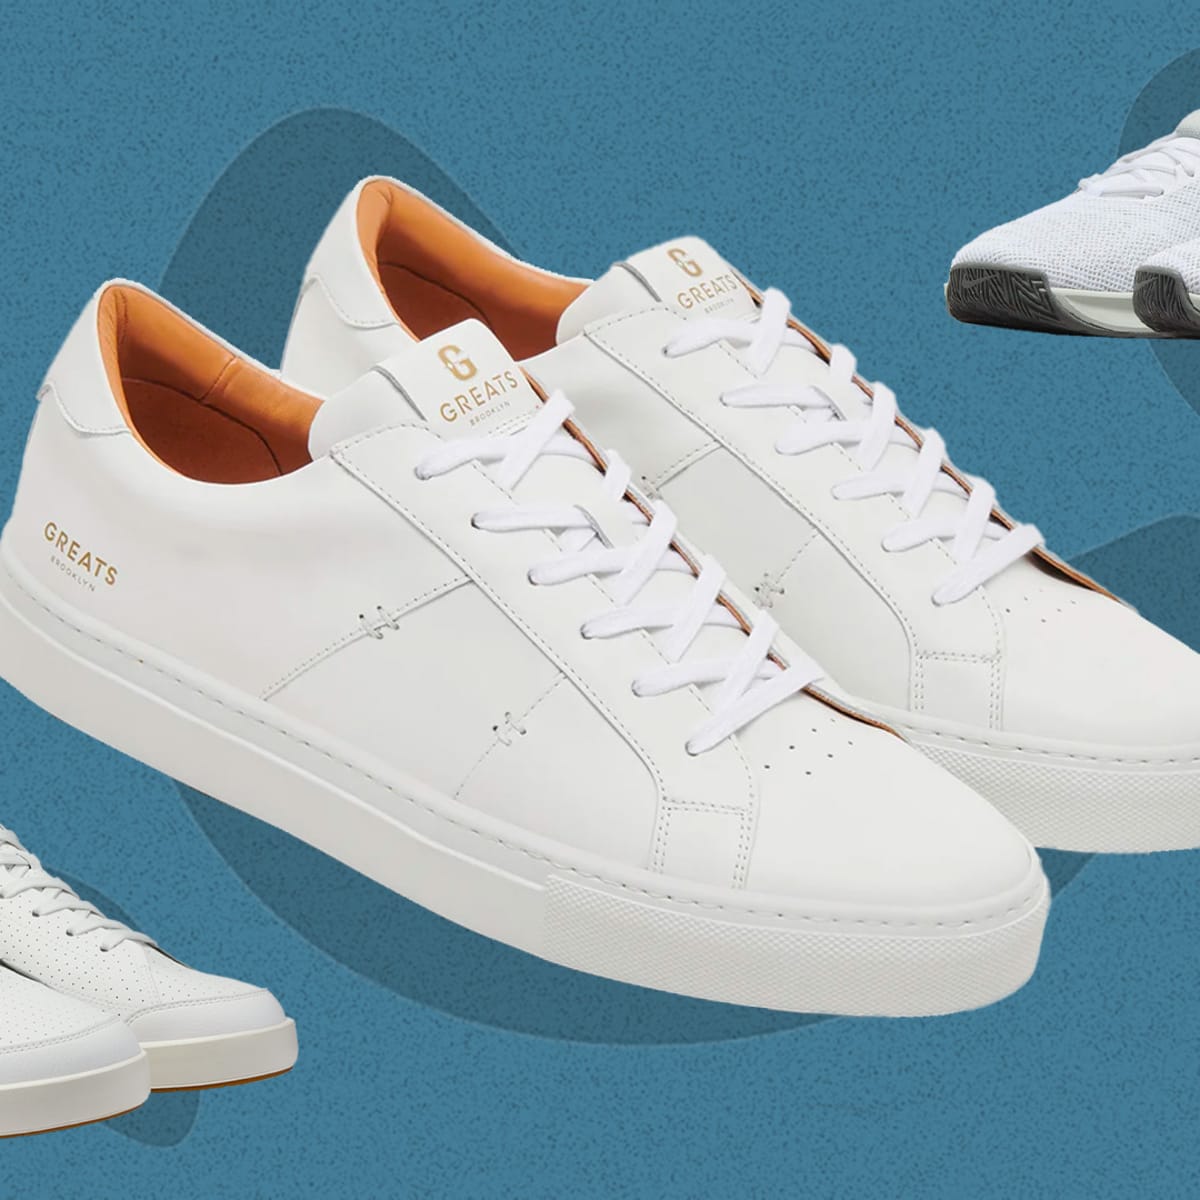 Sportswear that's stylish and practical, Men's shoes